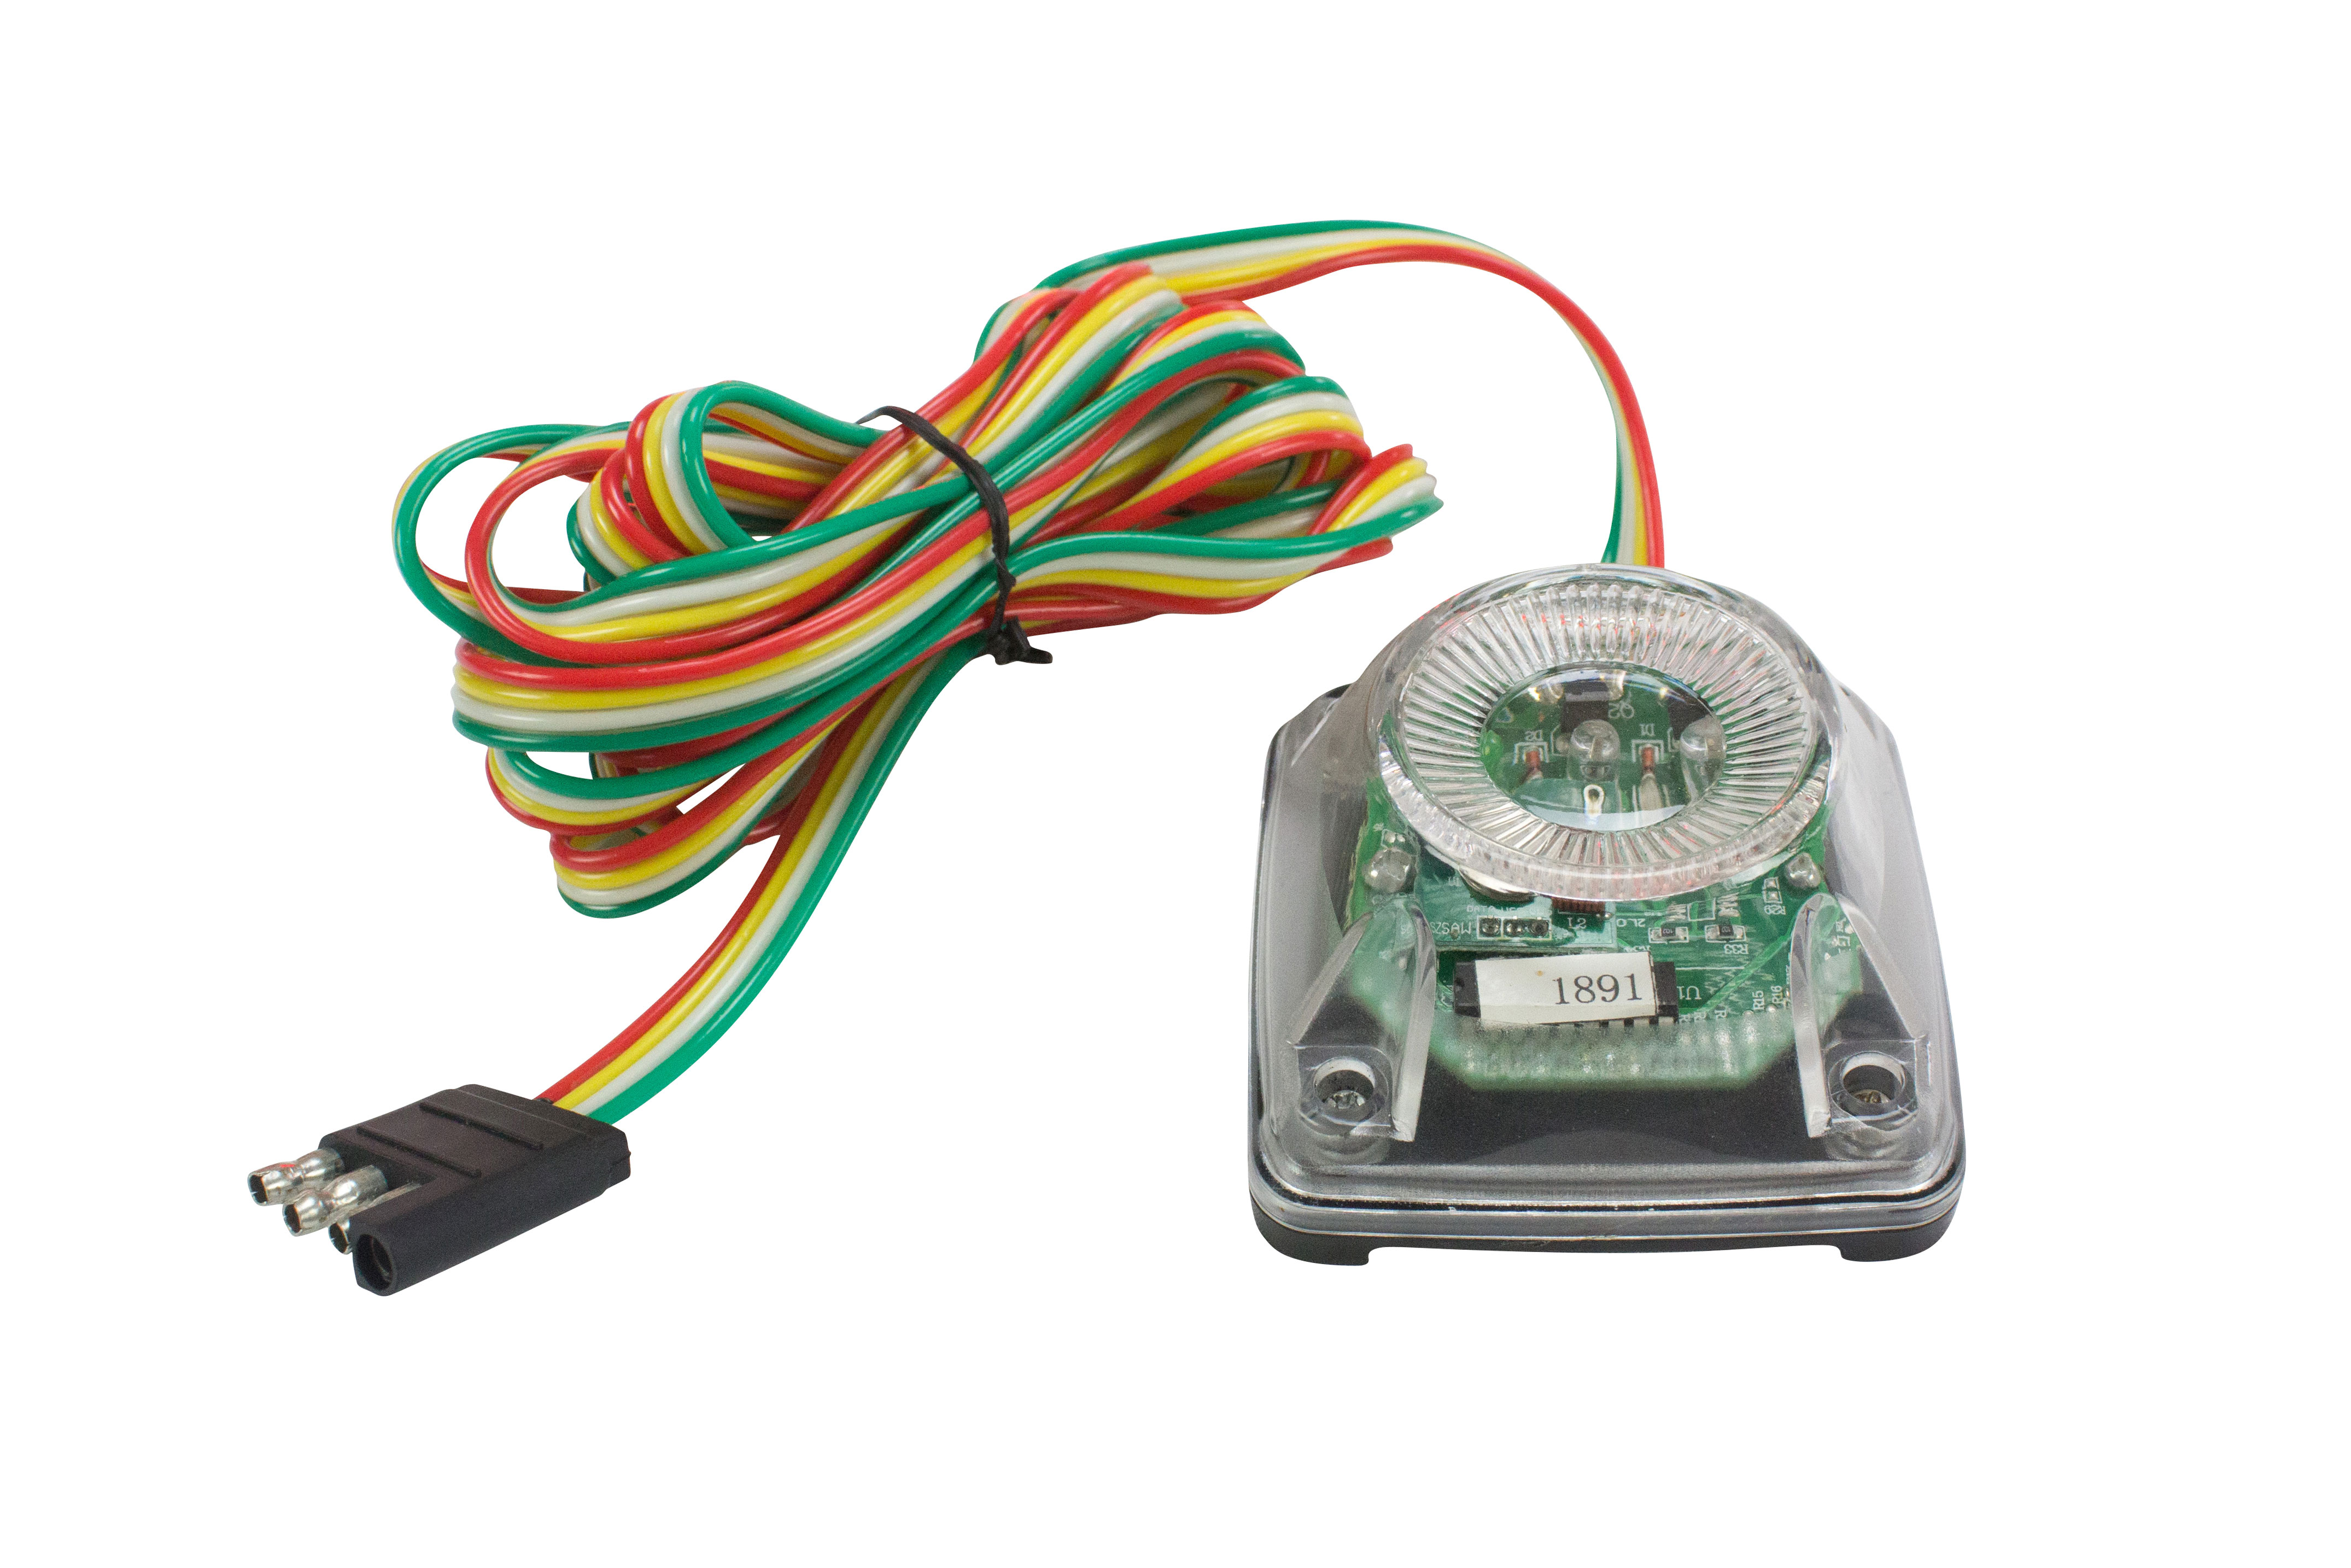 Battery Operated LED Tow Lights with an Operating Distance of 30'